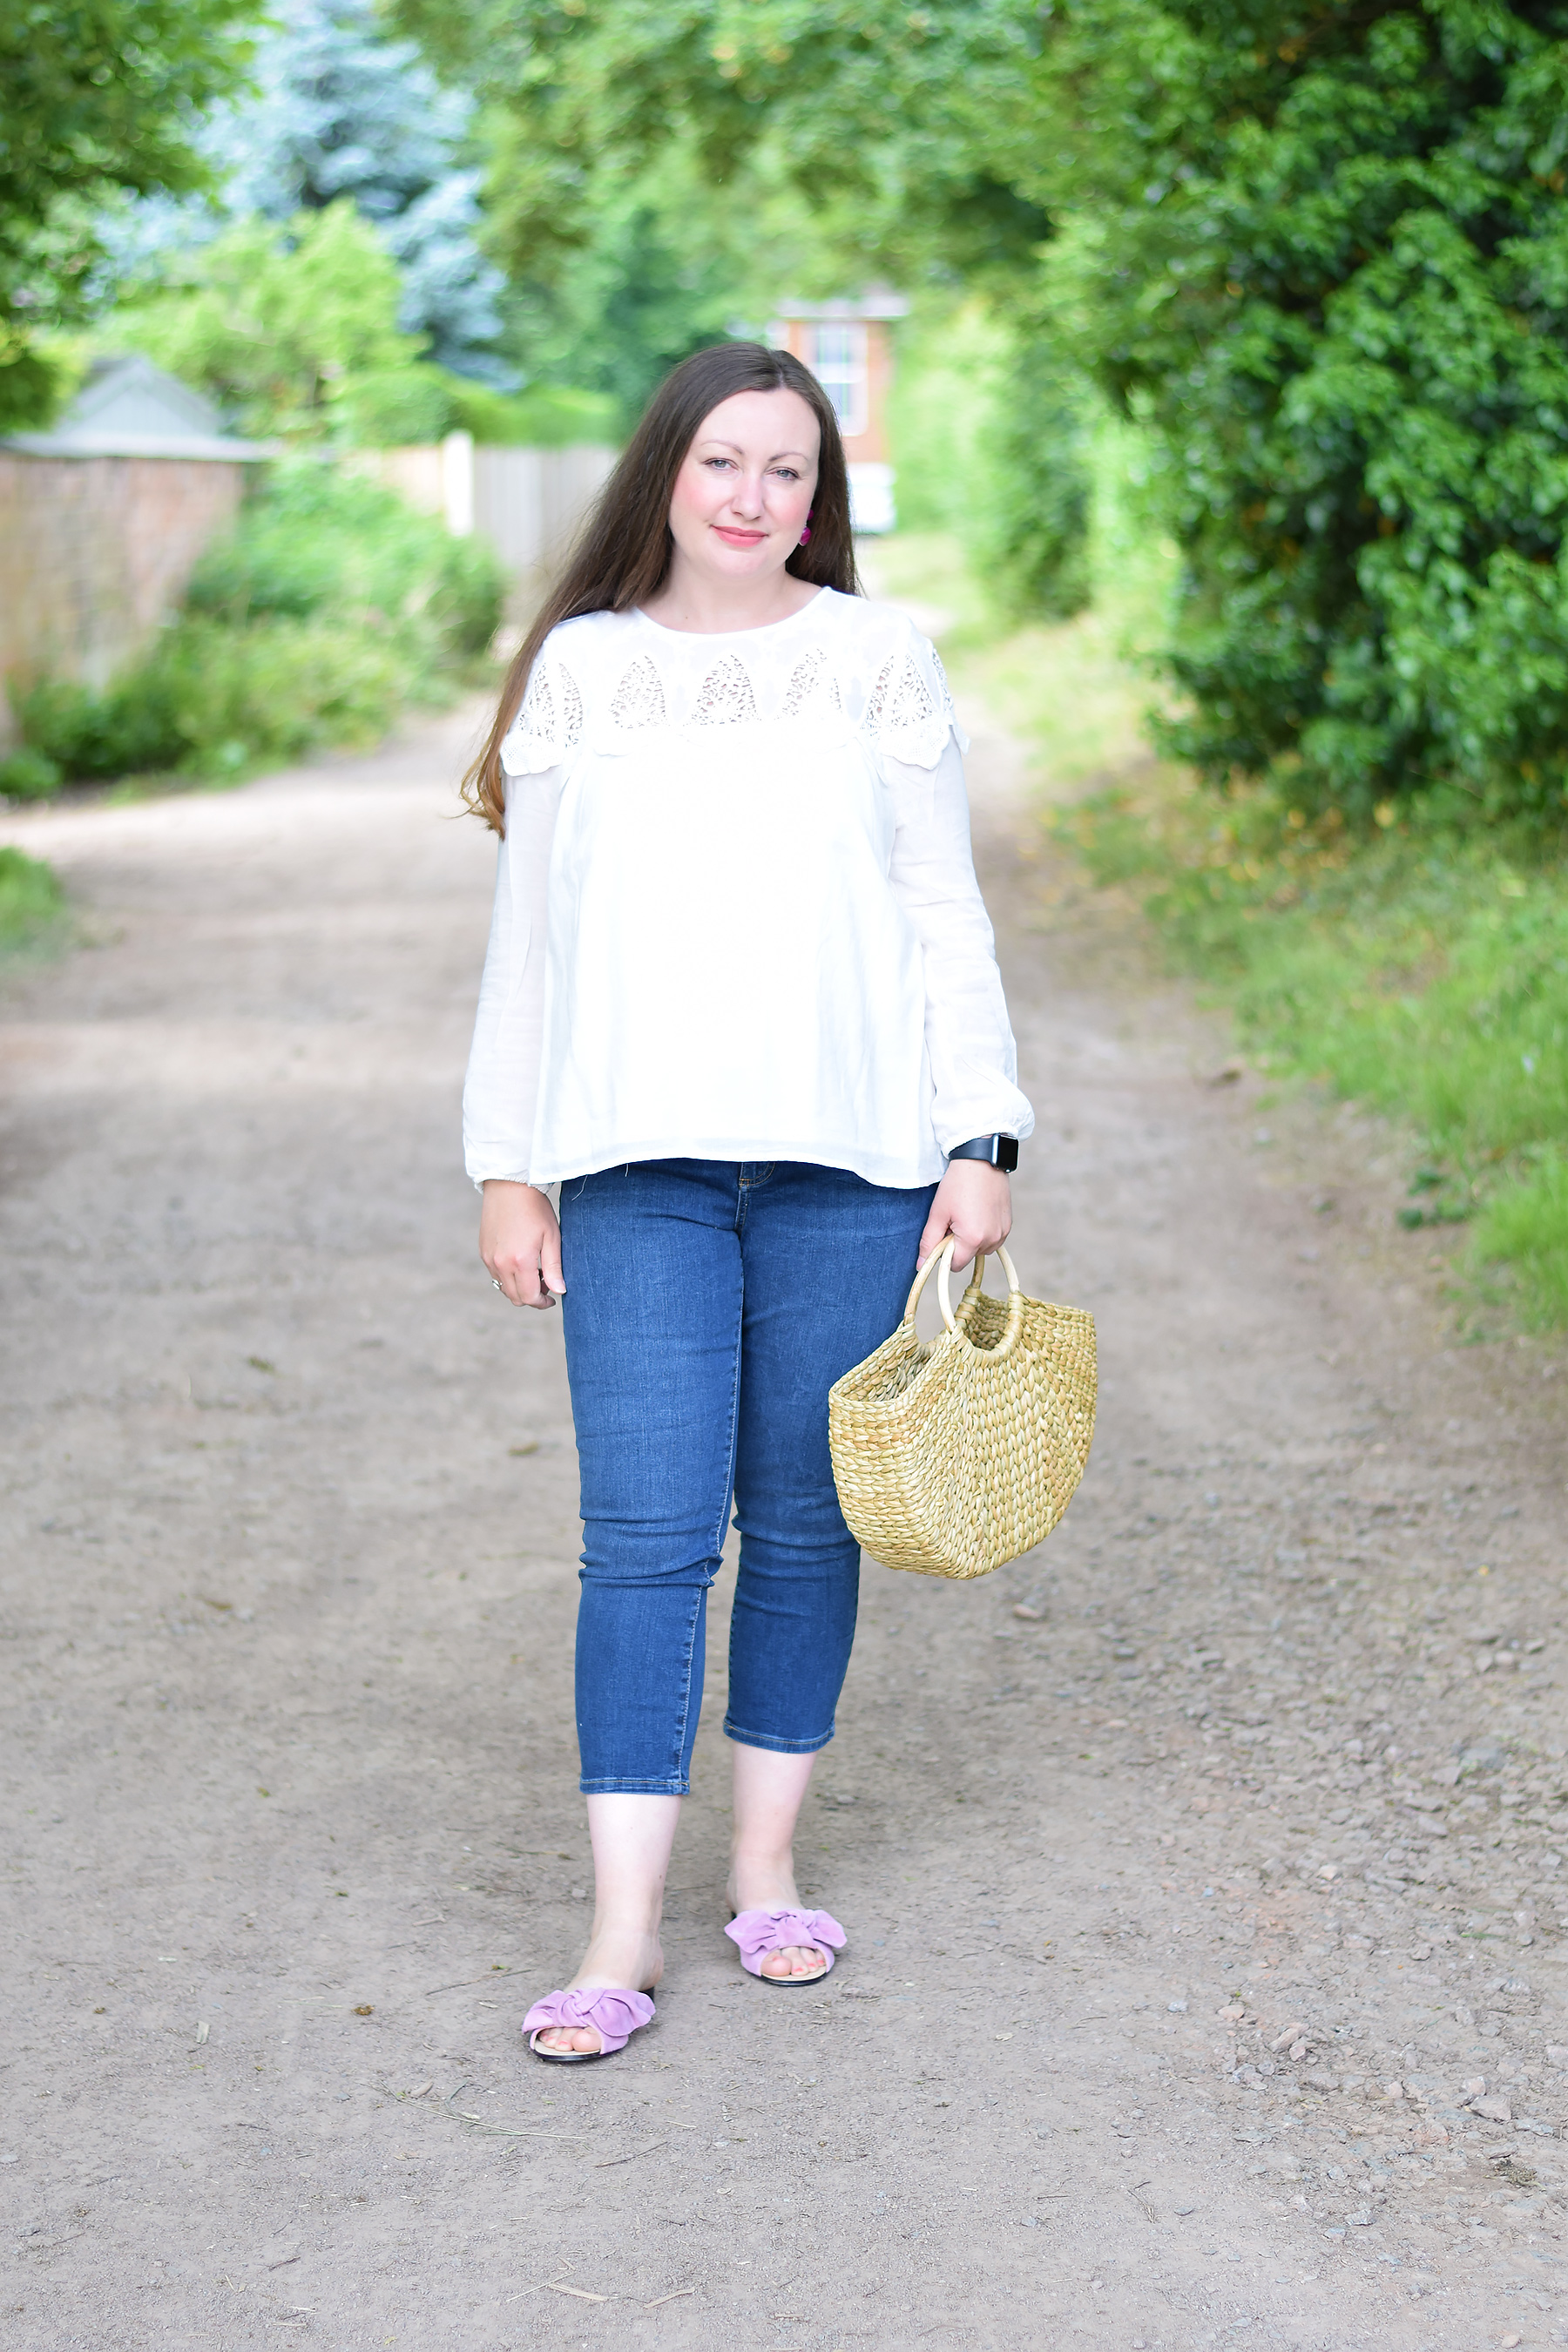 White stuff smock top and jeans with pink sandals